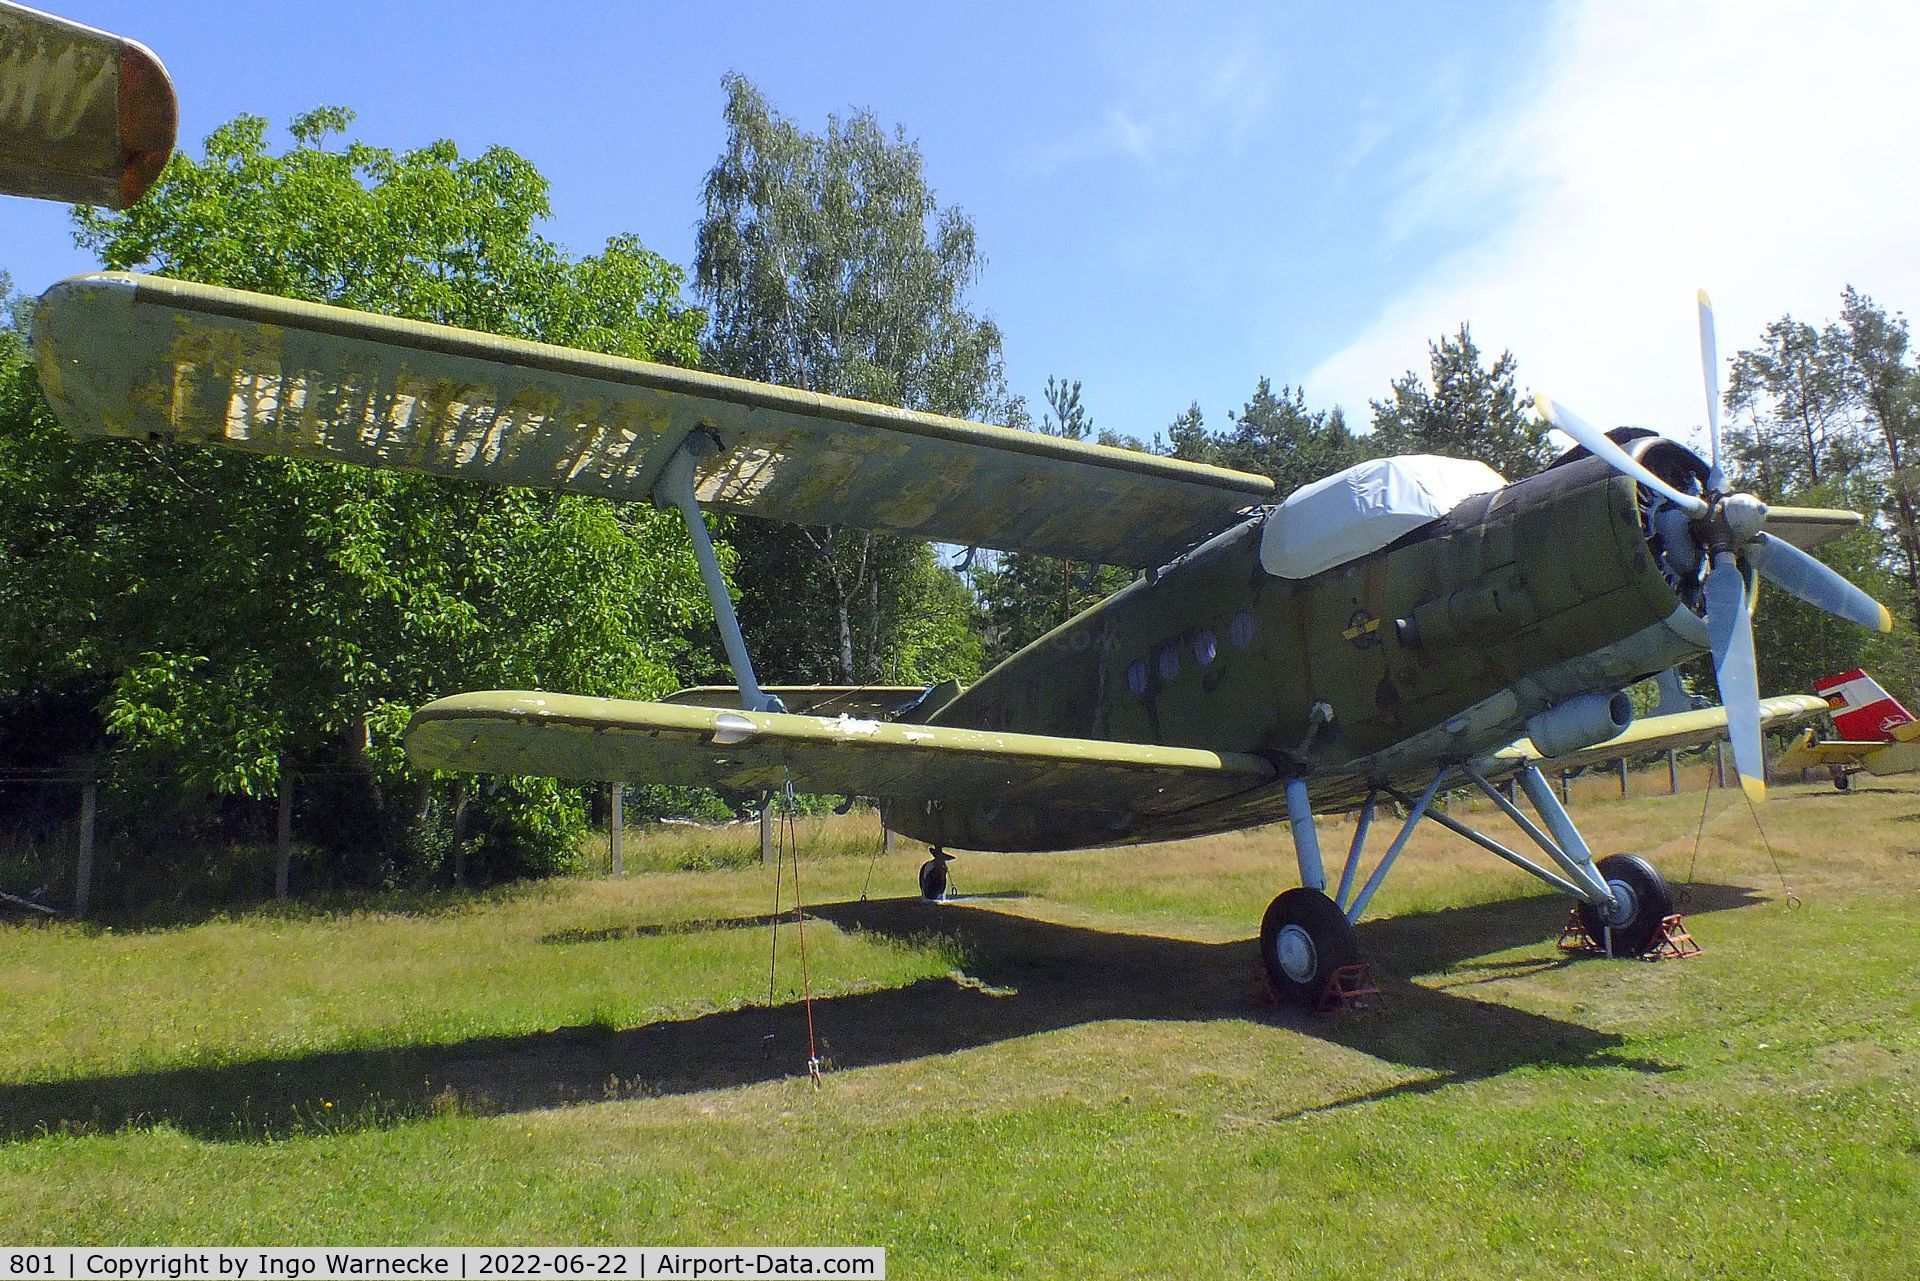 801, Antonov An-2TP C/N 128 (473) 01, Antonov An-2TP COLT (awaiting restoration, minus vertical tail and all wing flaps and ailerons) at the Flugplatzmuseum Cottbus (Cottbus airfield museum)